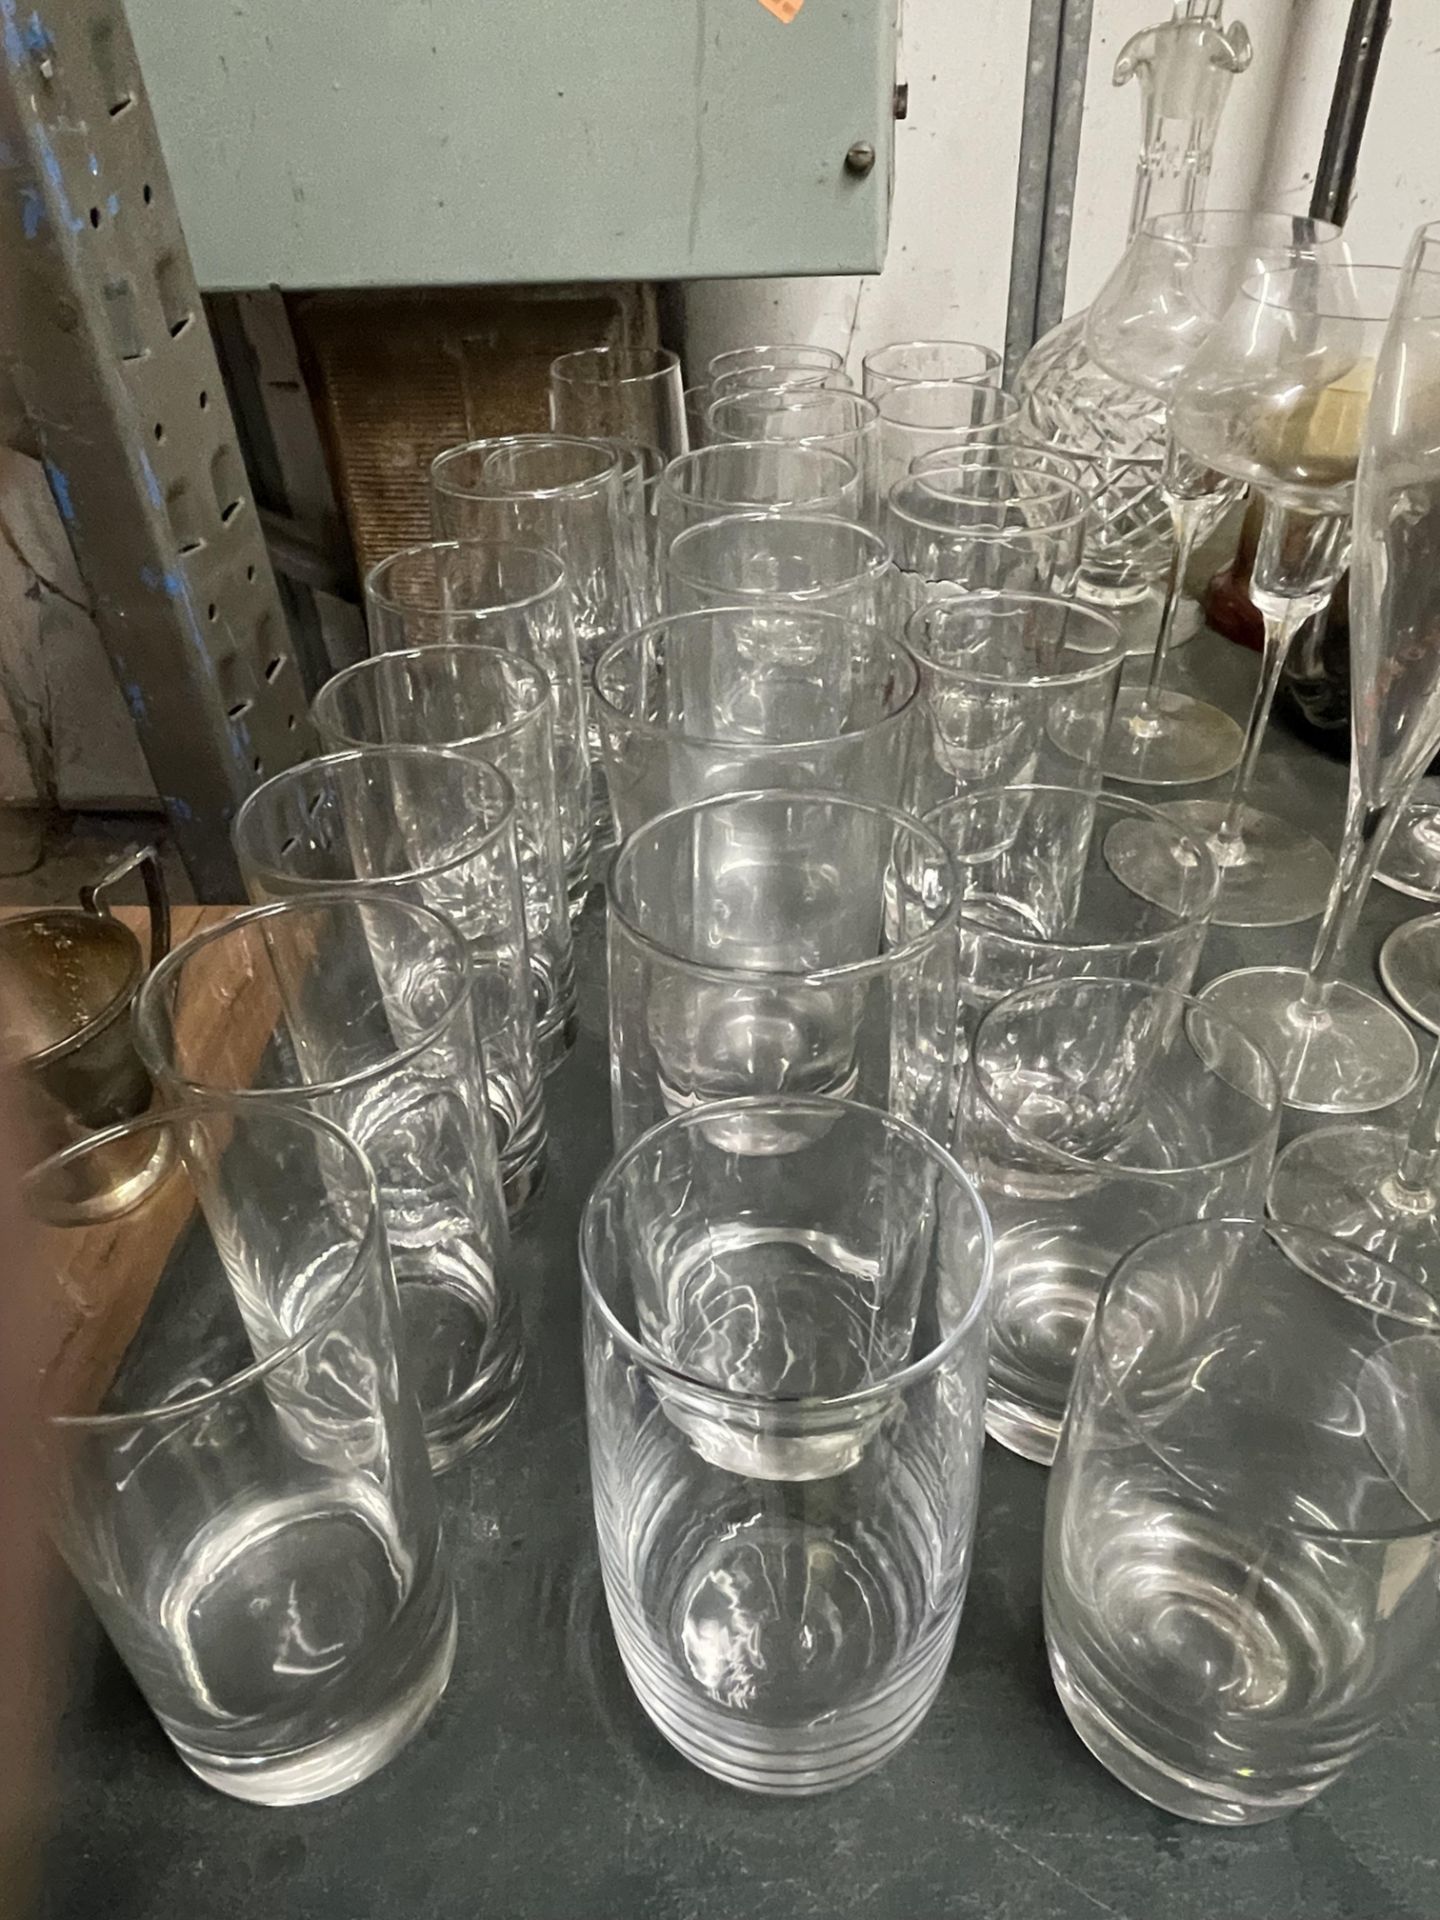 A QUANTITY OF GLASSES TO INCLUDE WINE, A DECANTER, CHAMPAGNE FLUTES, SHERRY, TUMBLERS, ETC - Image 2 of 4